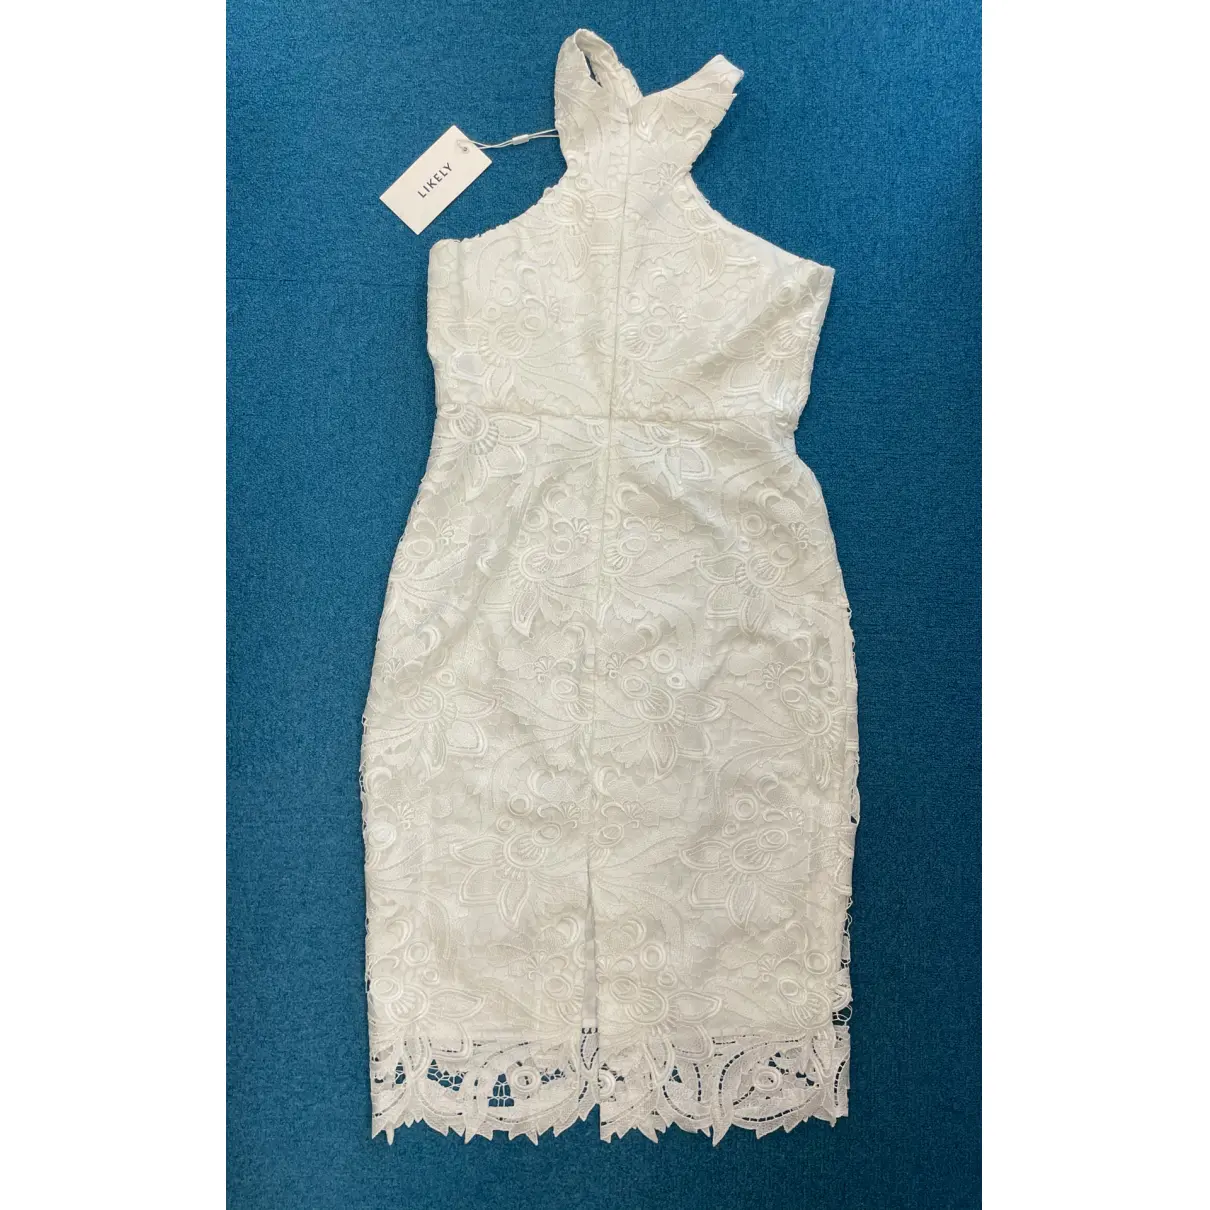 Buy Likely Lace mid-length dress online